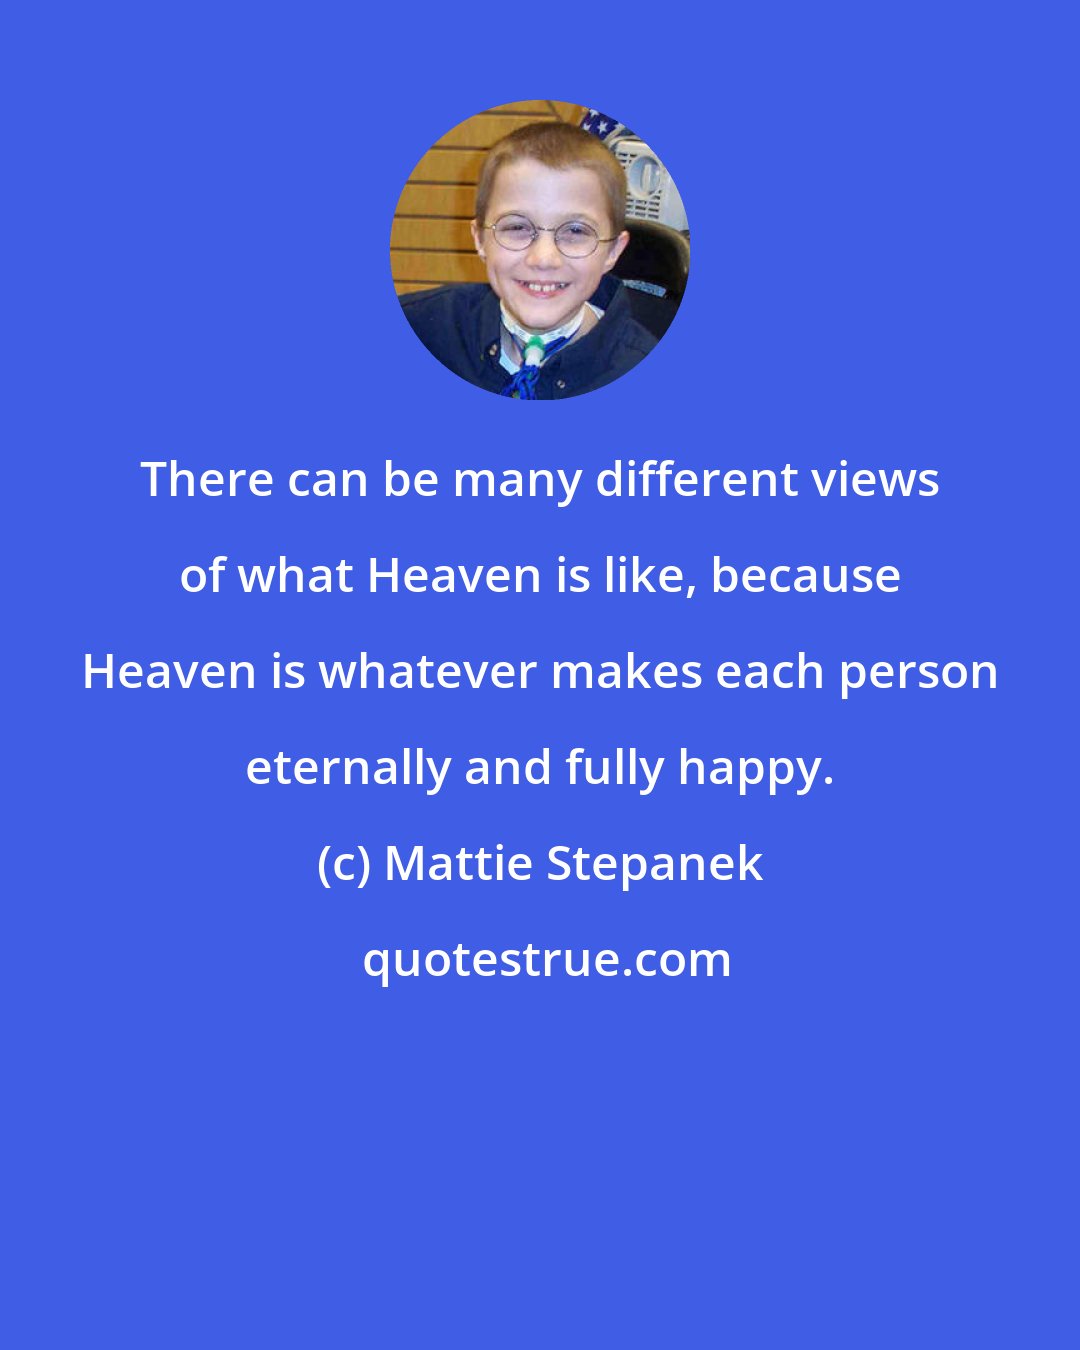 Mattie Stepanek: There can be many different views of what Heaven is like, because Heaven is whatever makes each person eternally and fully happy.